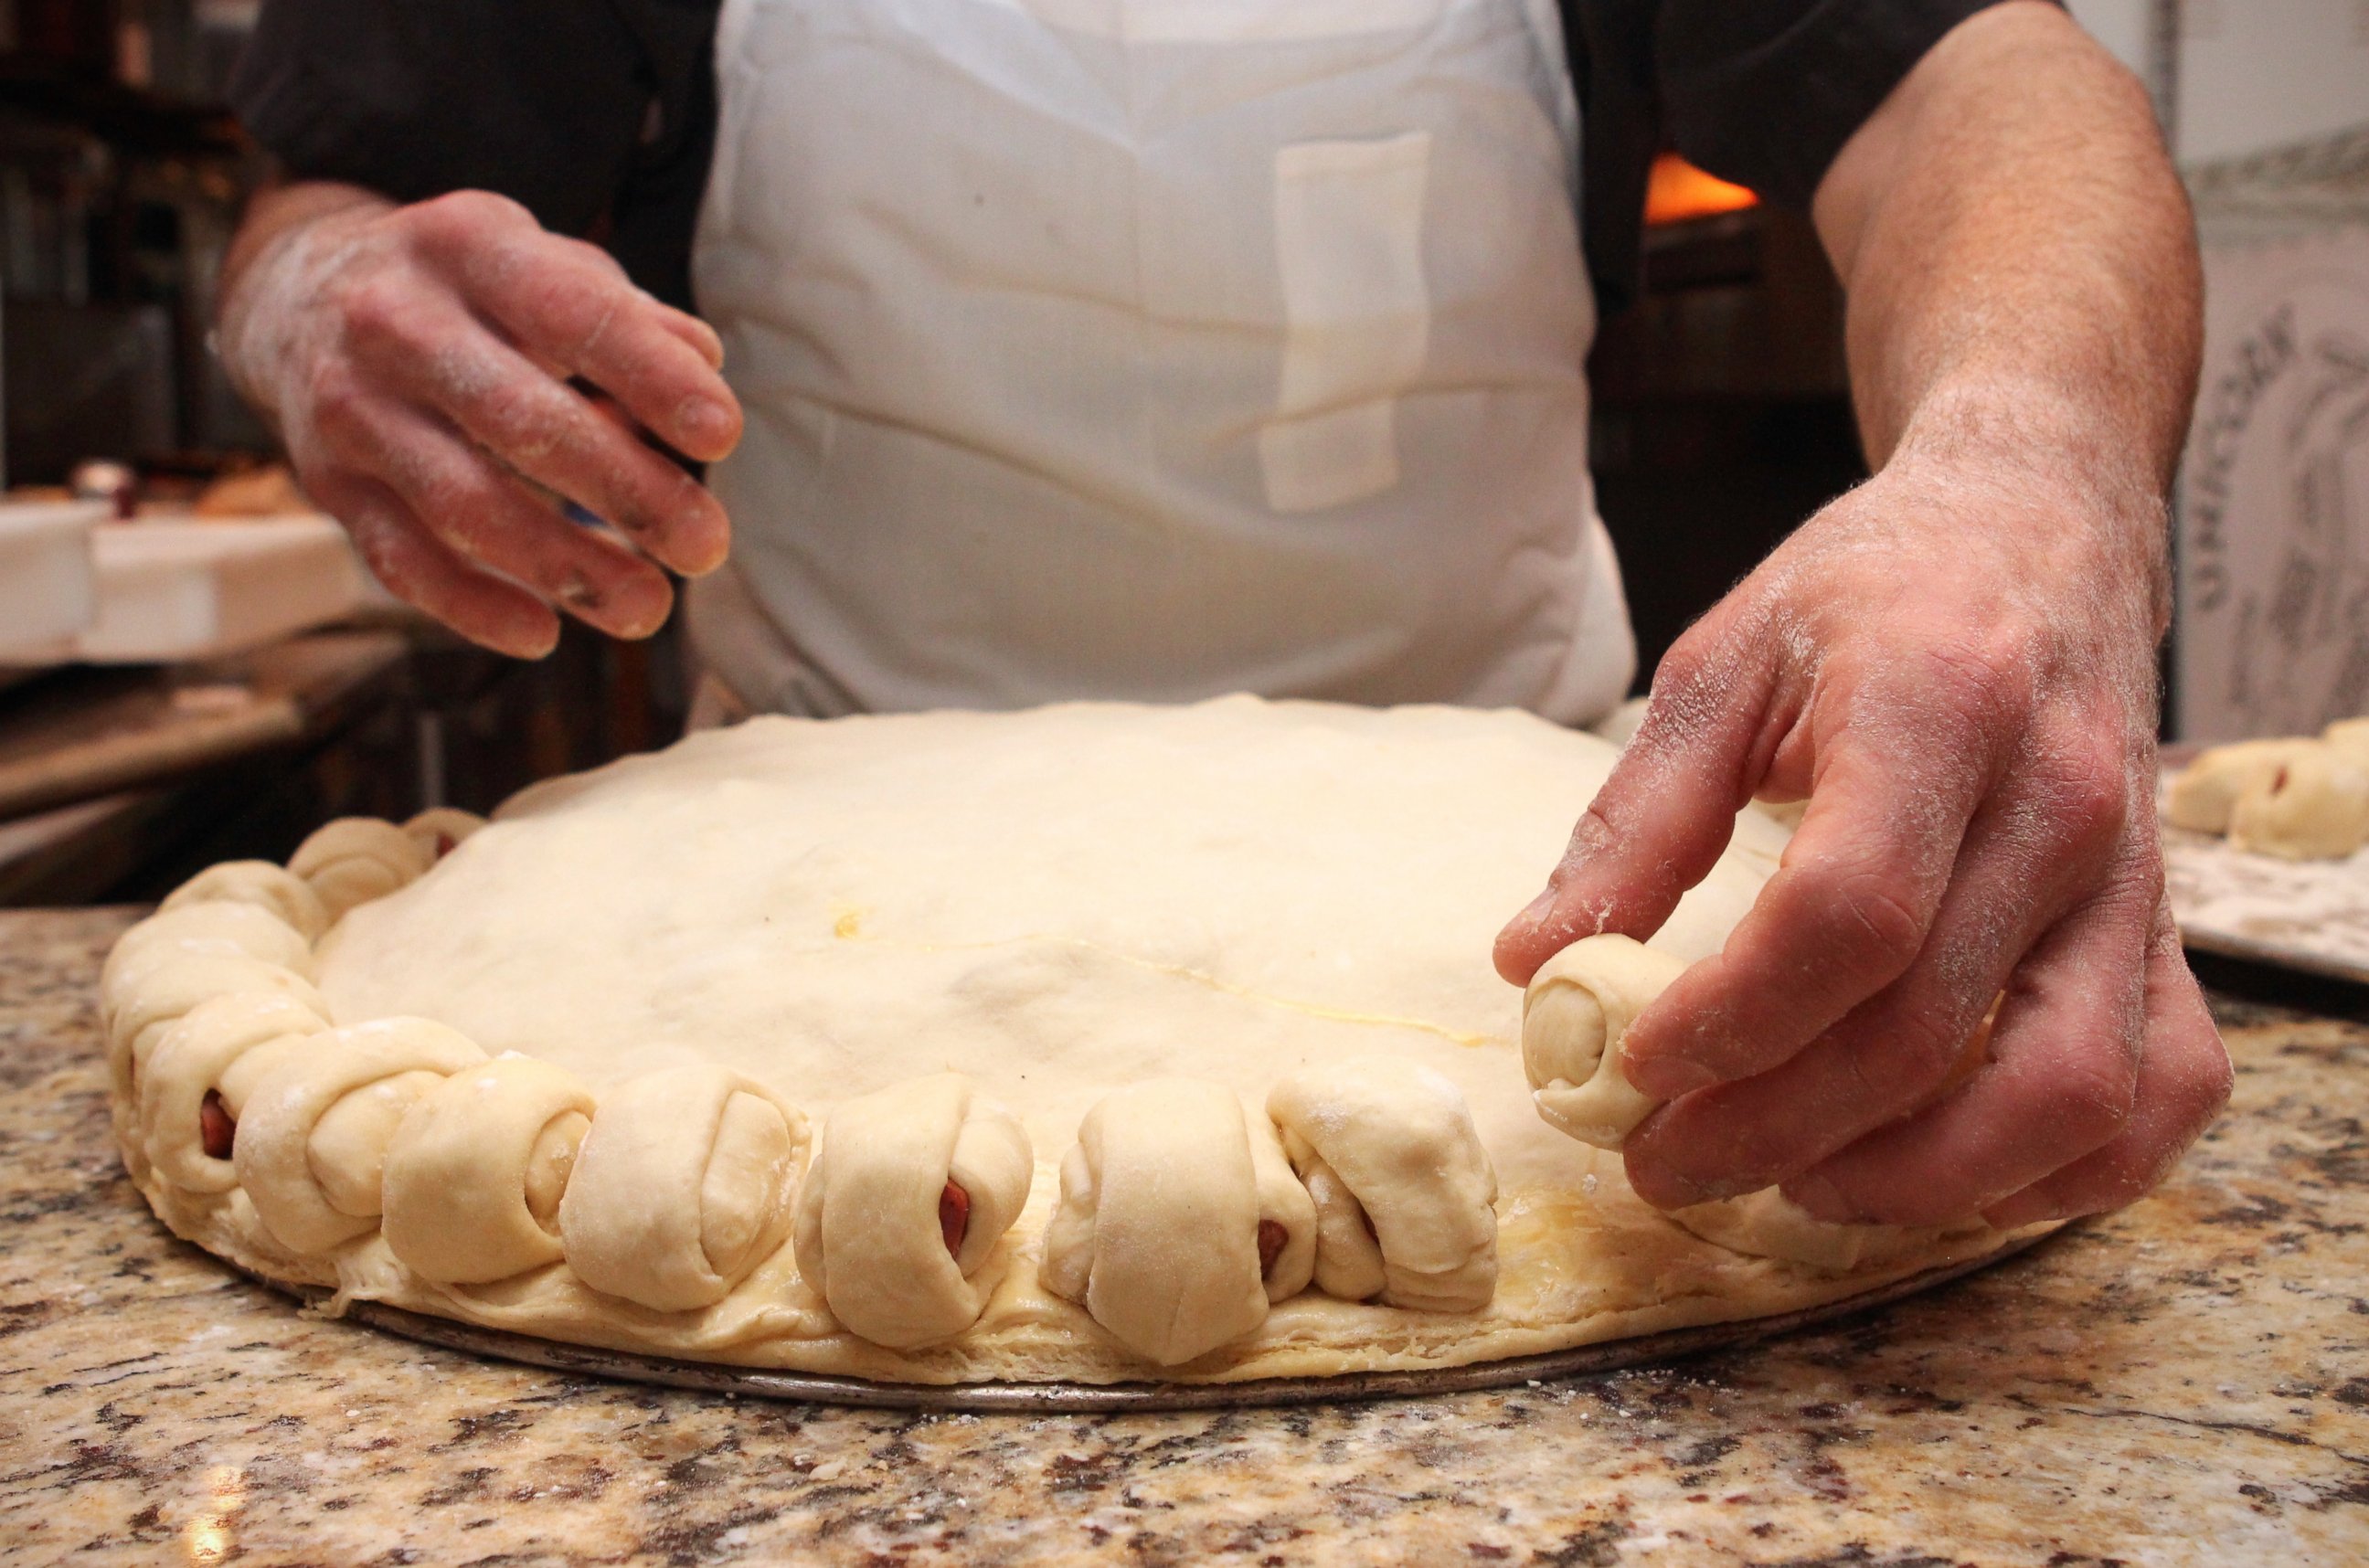 PHOTO: Six chefs in Dallas collaborated to make this crazy pie.